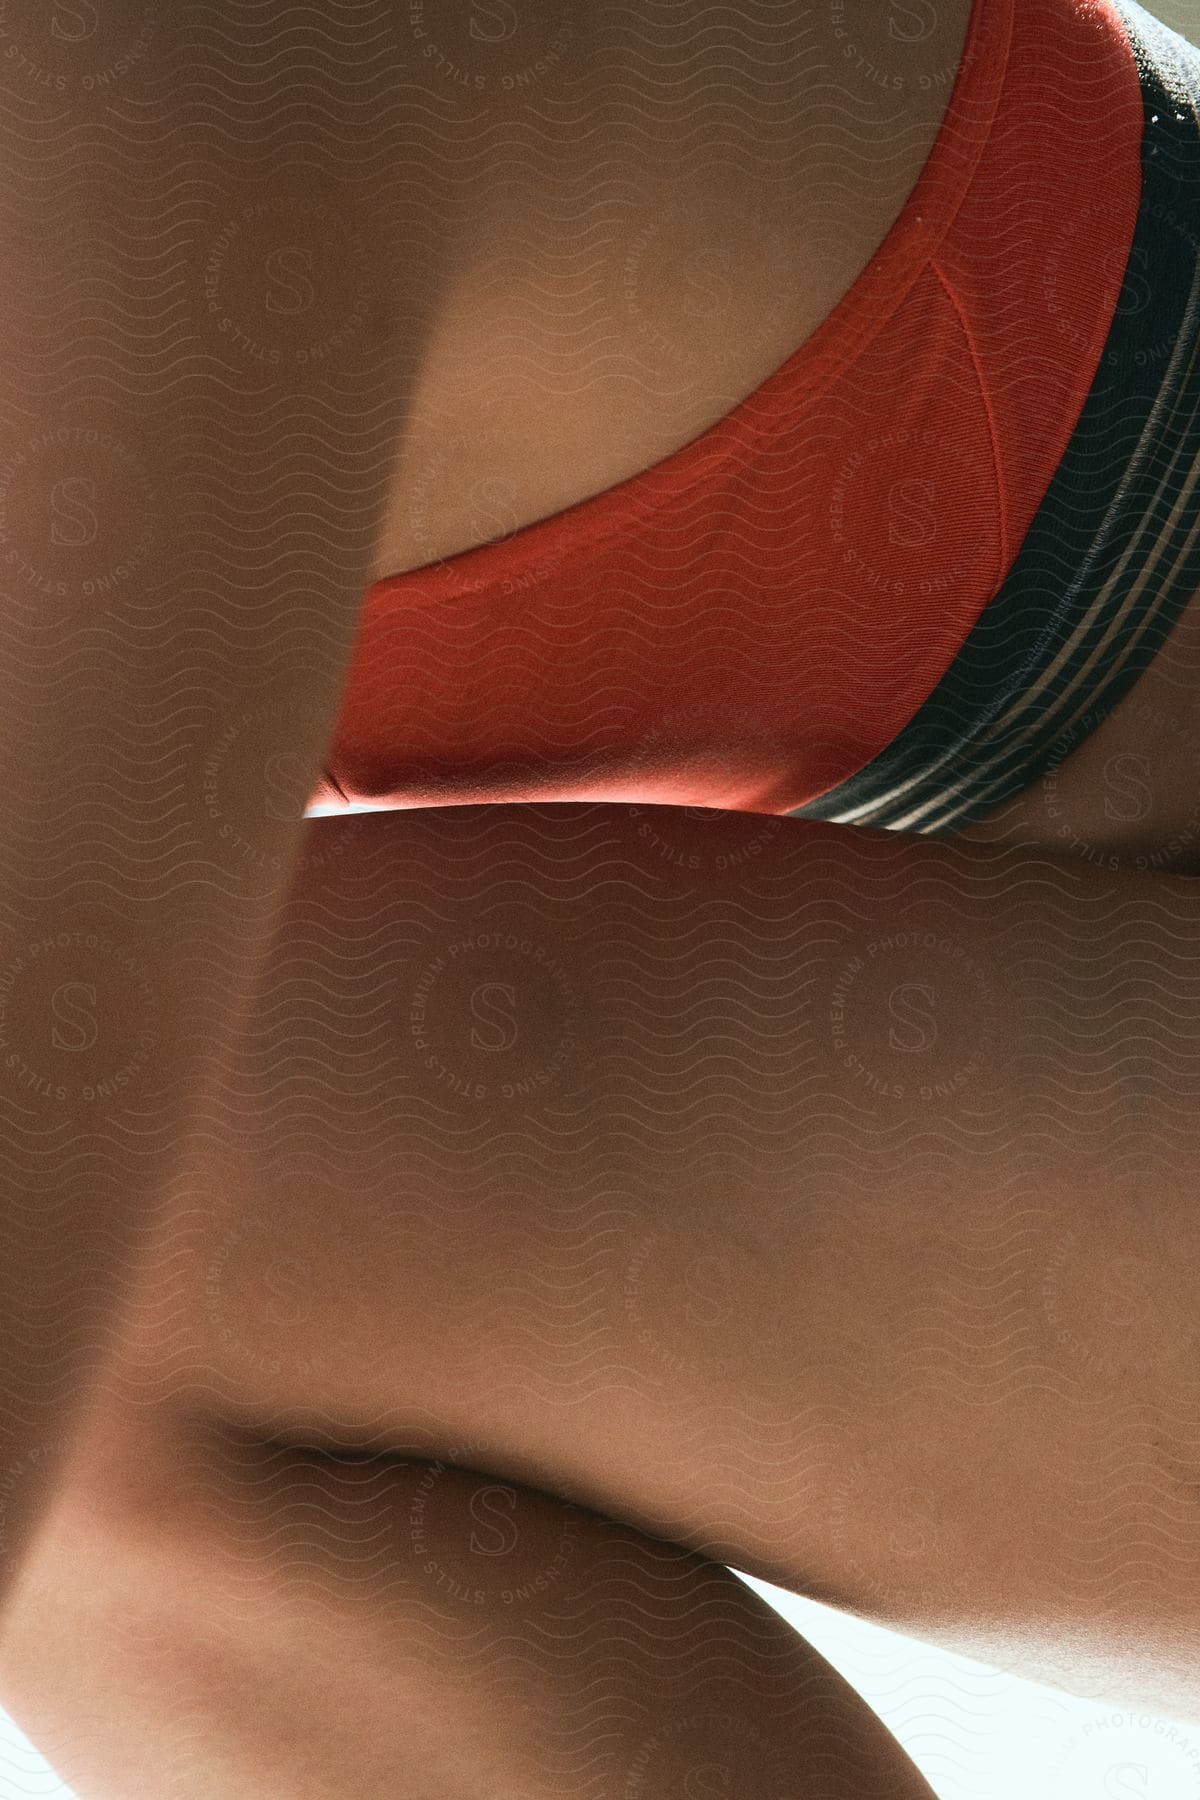 This is a close-up image capturing the play of light and shadow on a person's torso, emphasizing the form and texture of the skin and clothing.